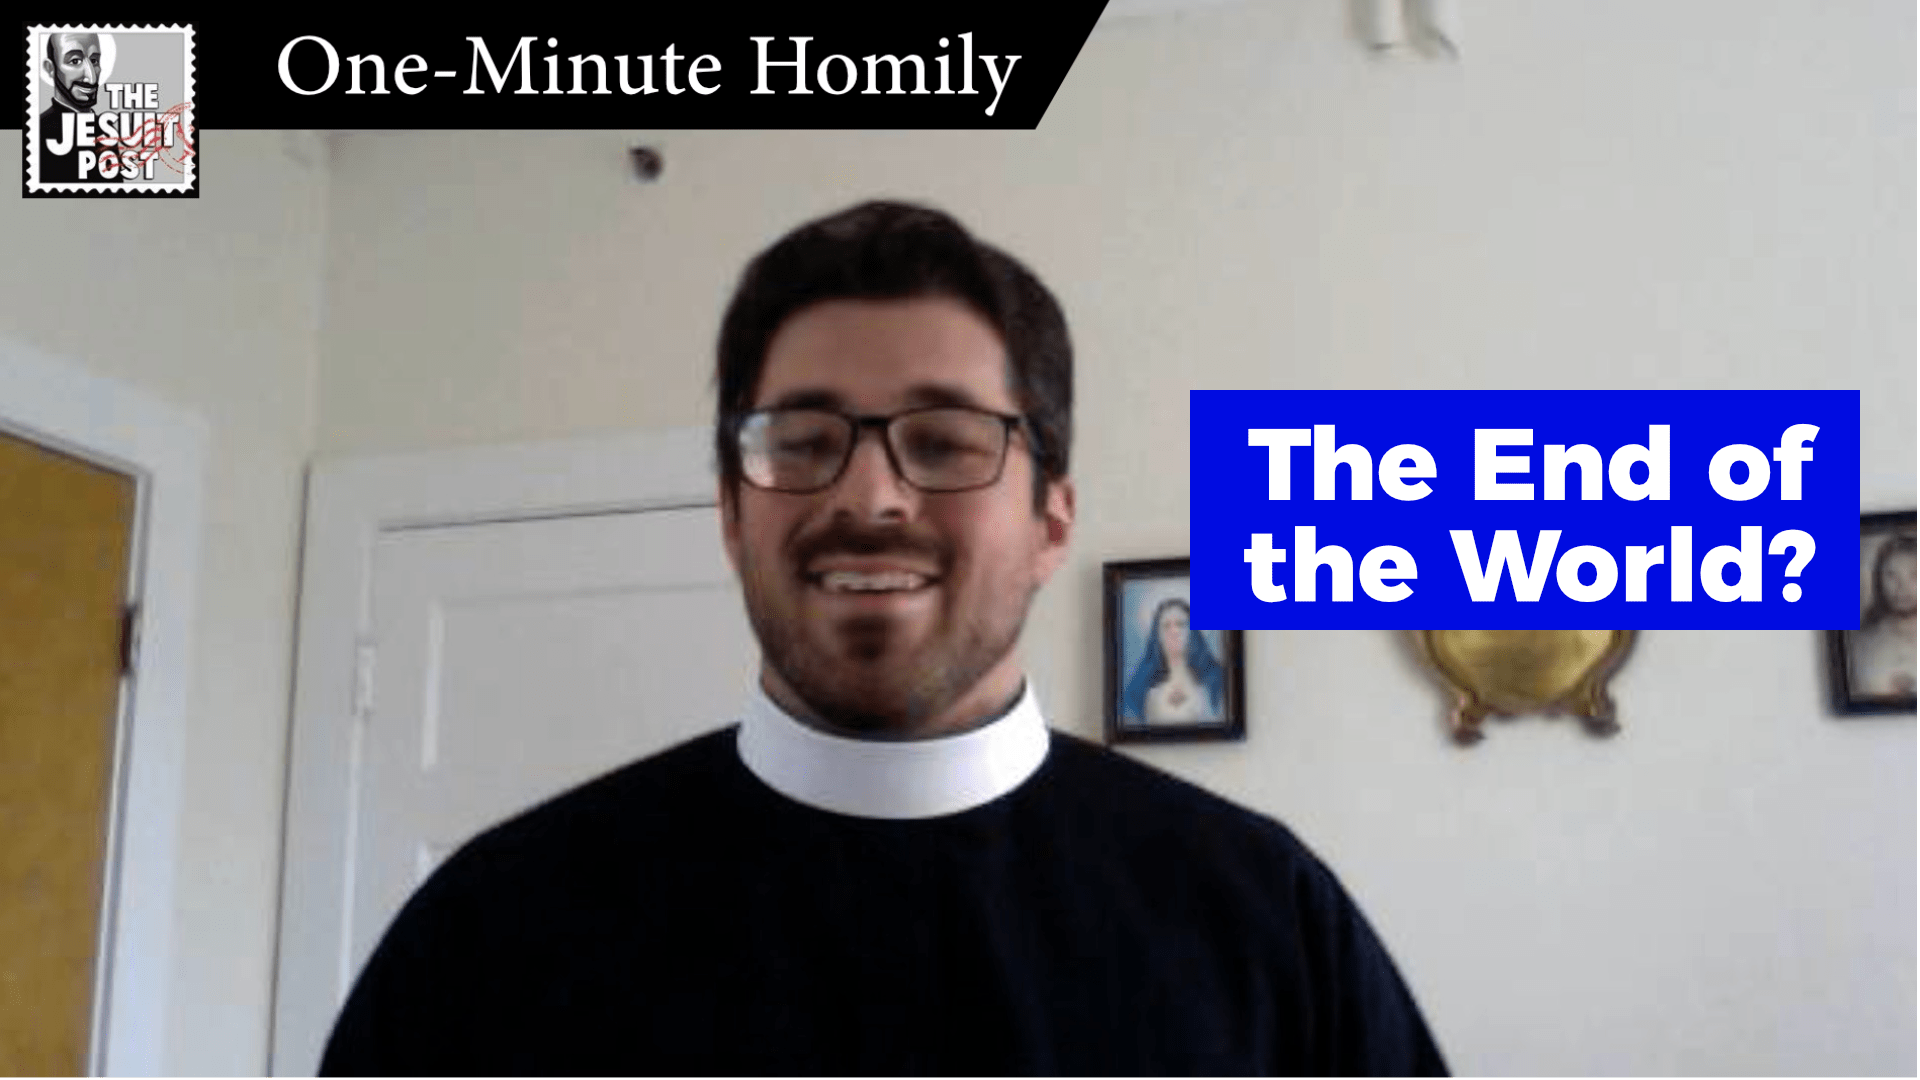 One-Minute Homily: “The End of the World?”